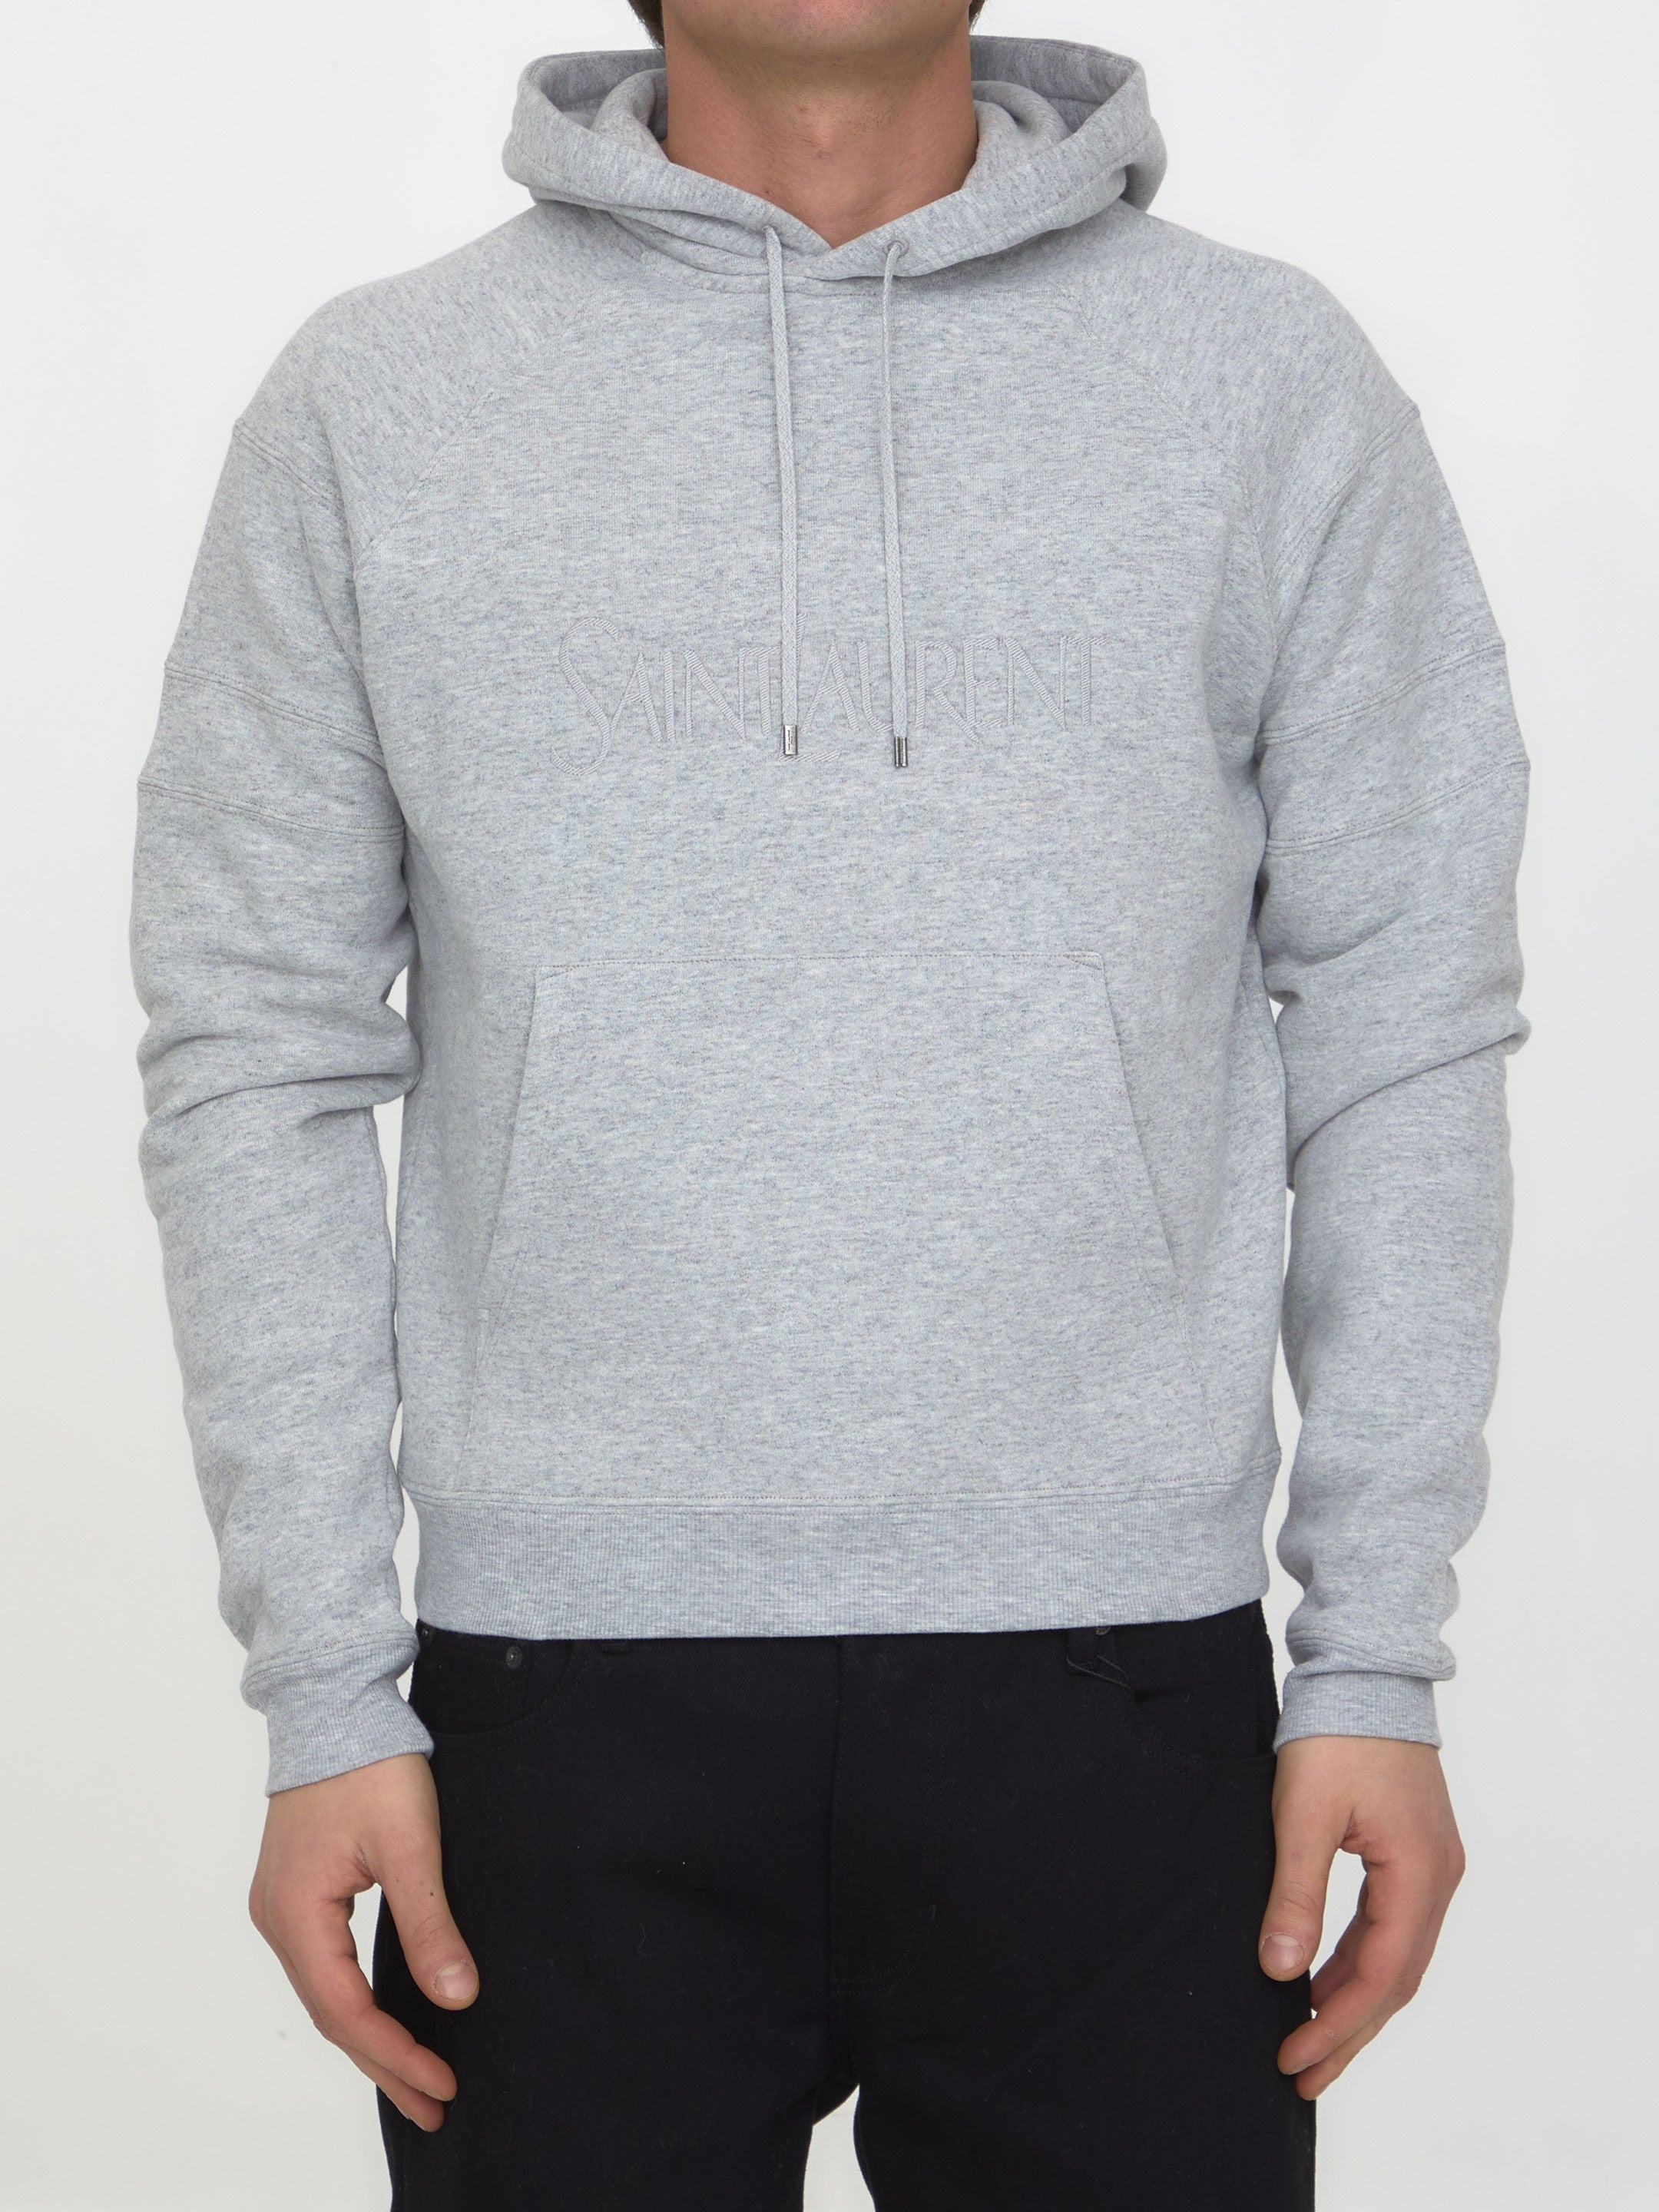 SAINT-LAURENT-OUTLET-SALE-Cotton-hoodie-with-logo-Strick-M-GREY-ARCHIVE-COLLECTION.jpg